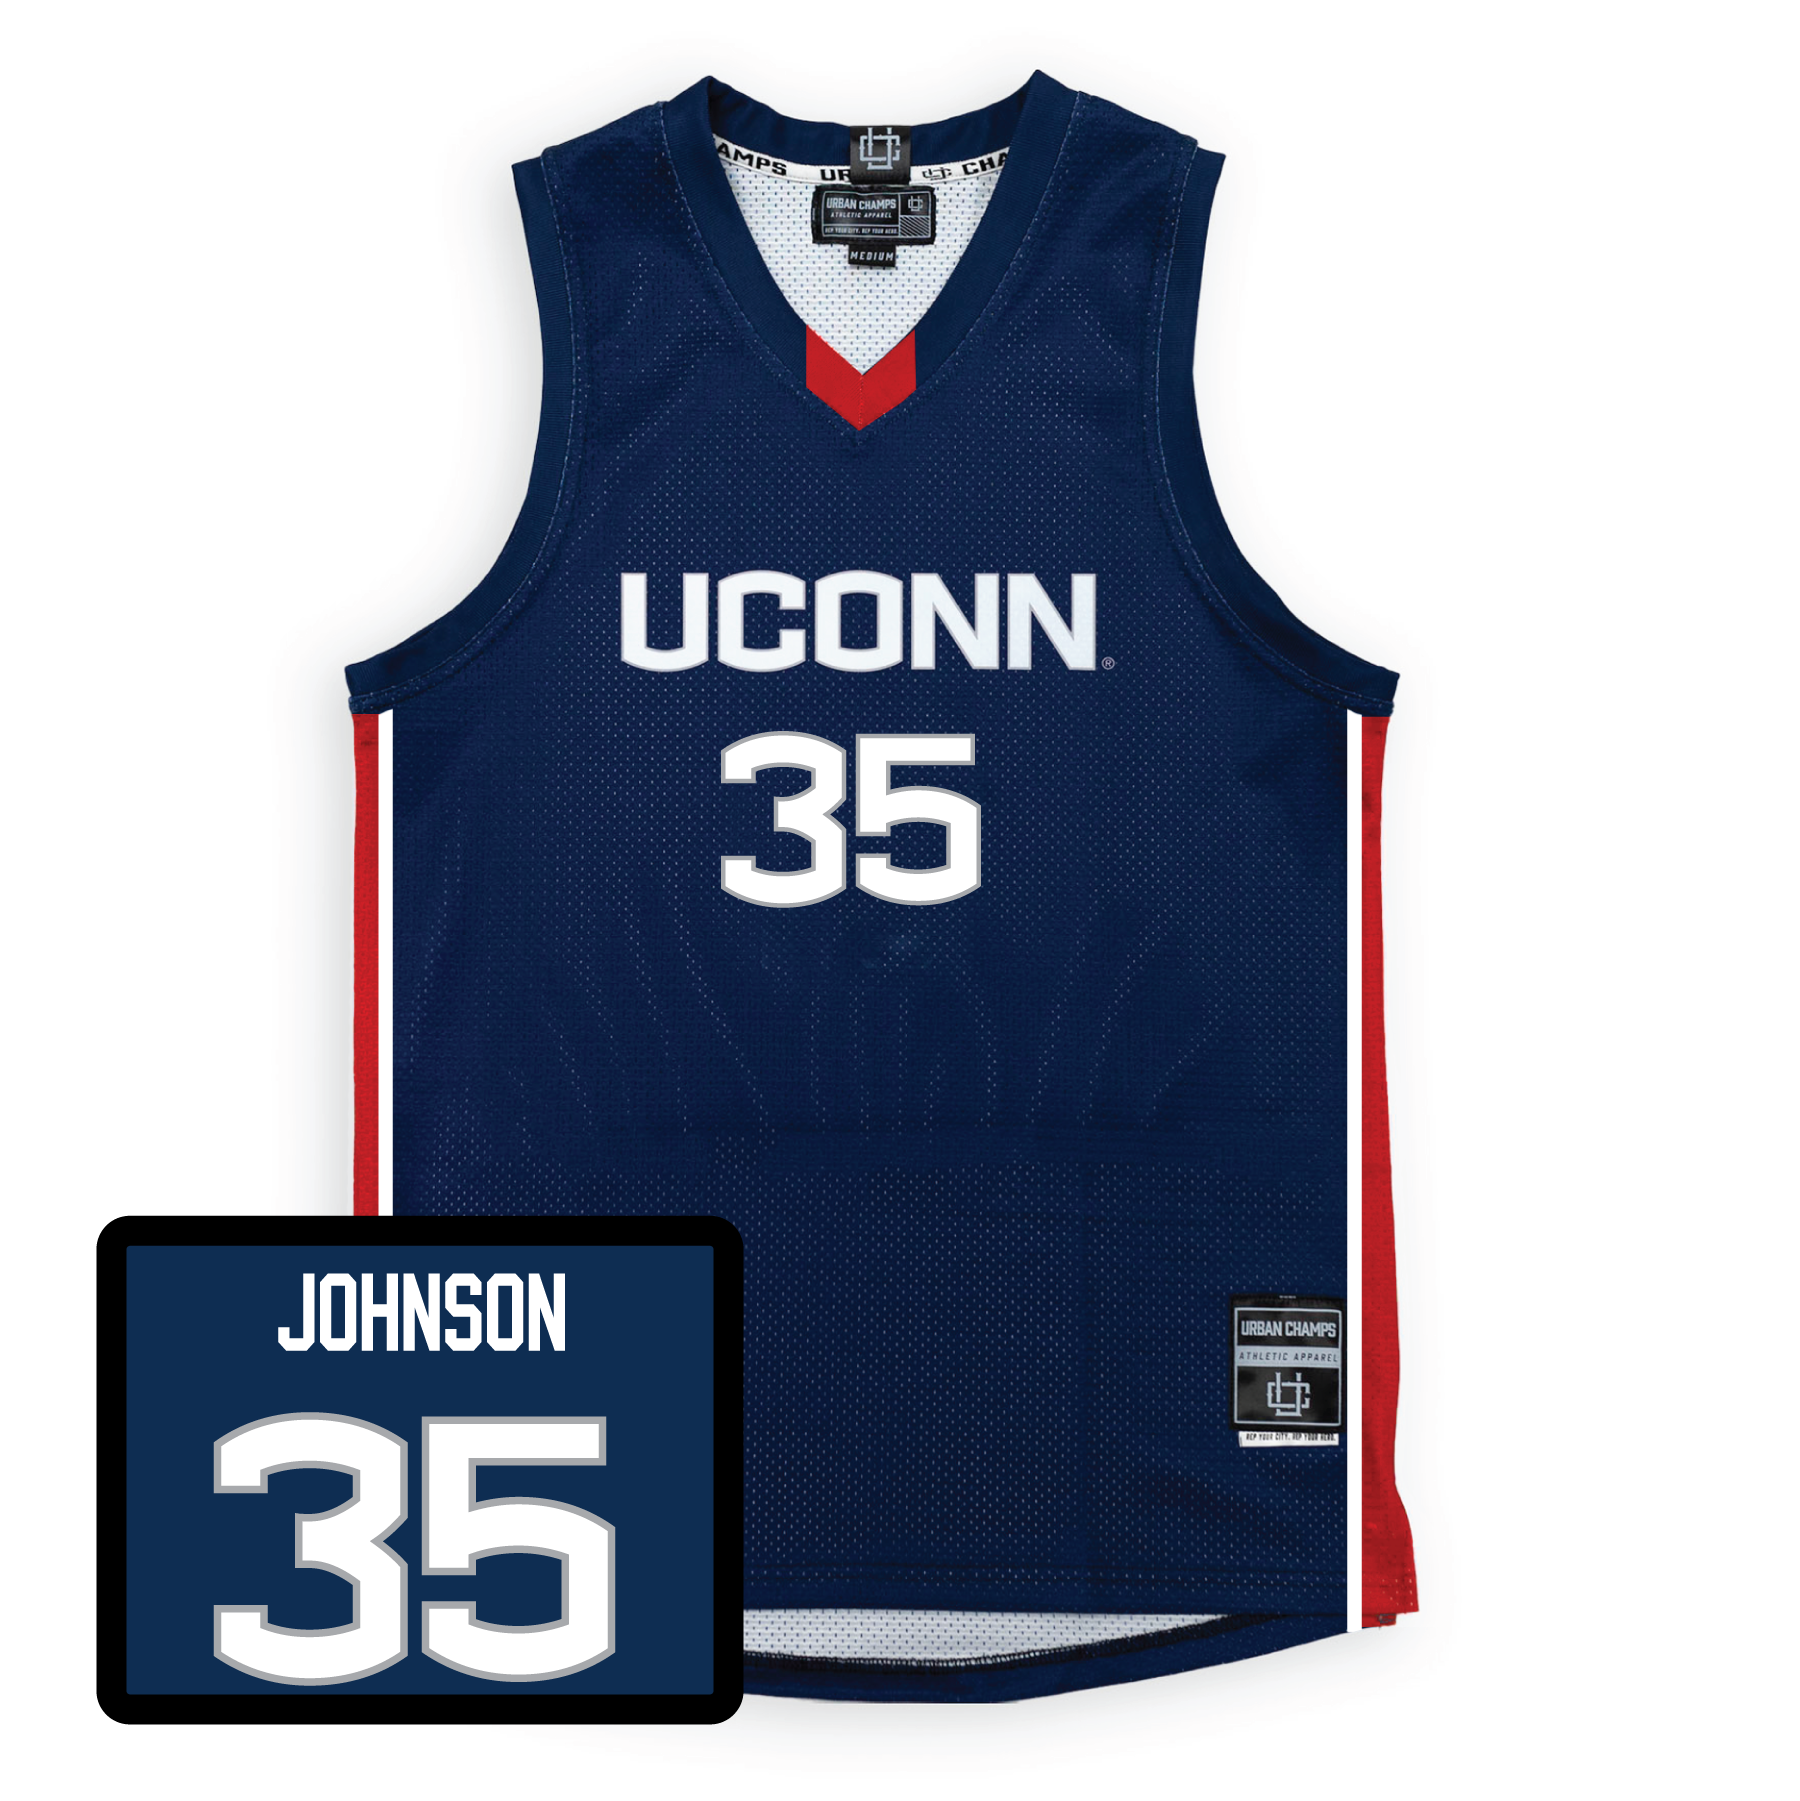 UConn embracing new era with officially licensed player merchandise